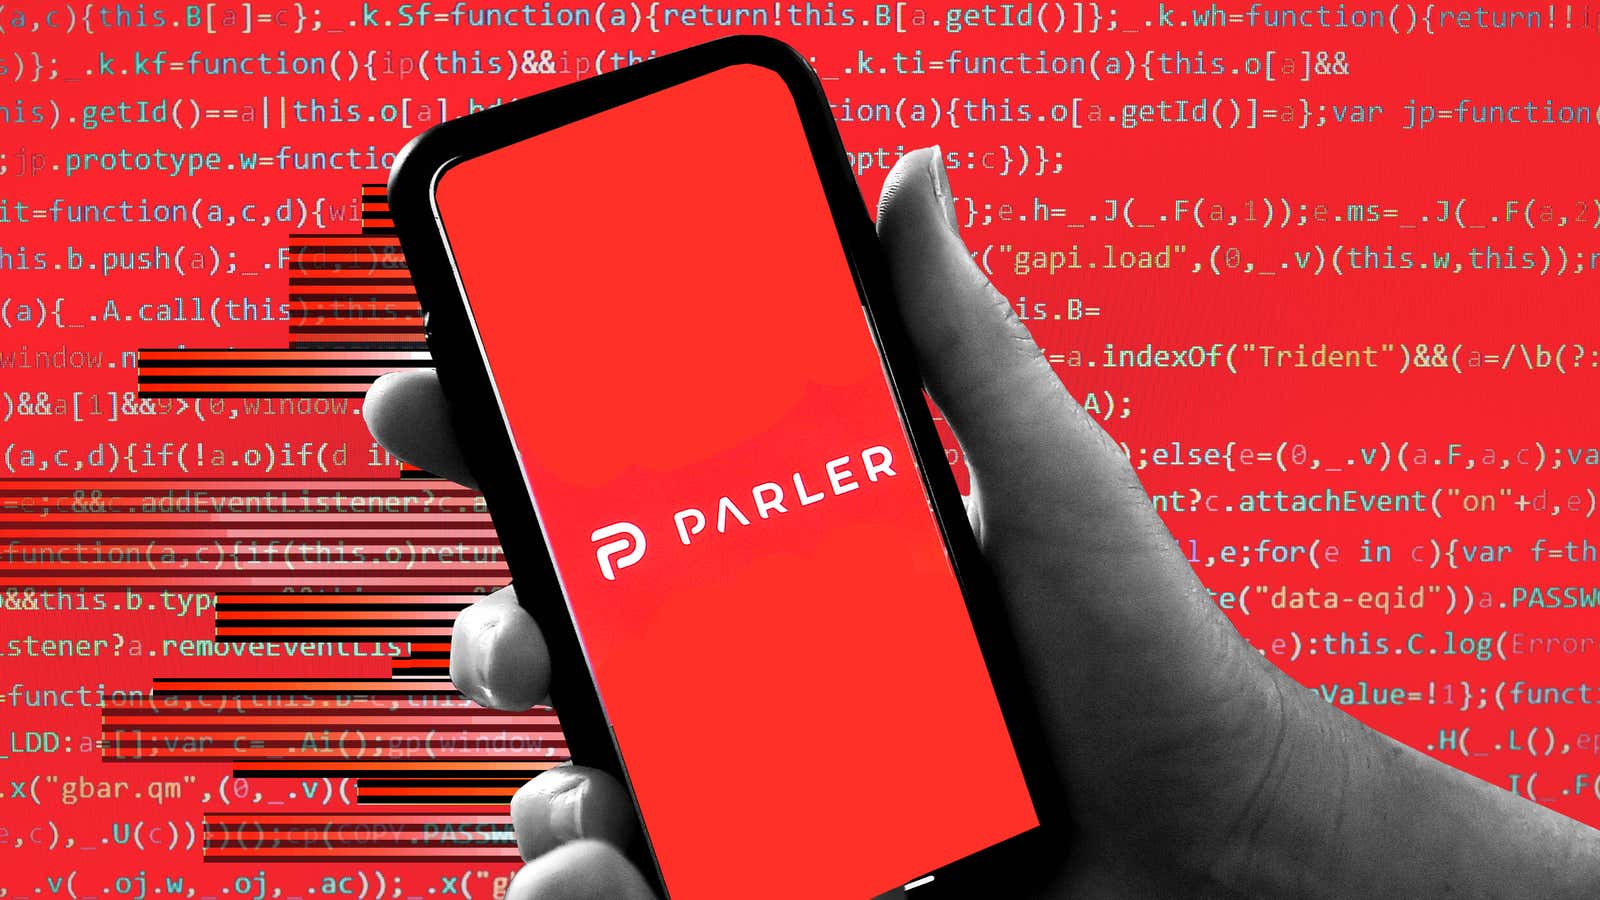 Parler Wasn't Hacked, but That Doesn't Mean It's Safe to Use